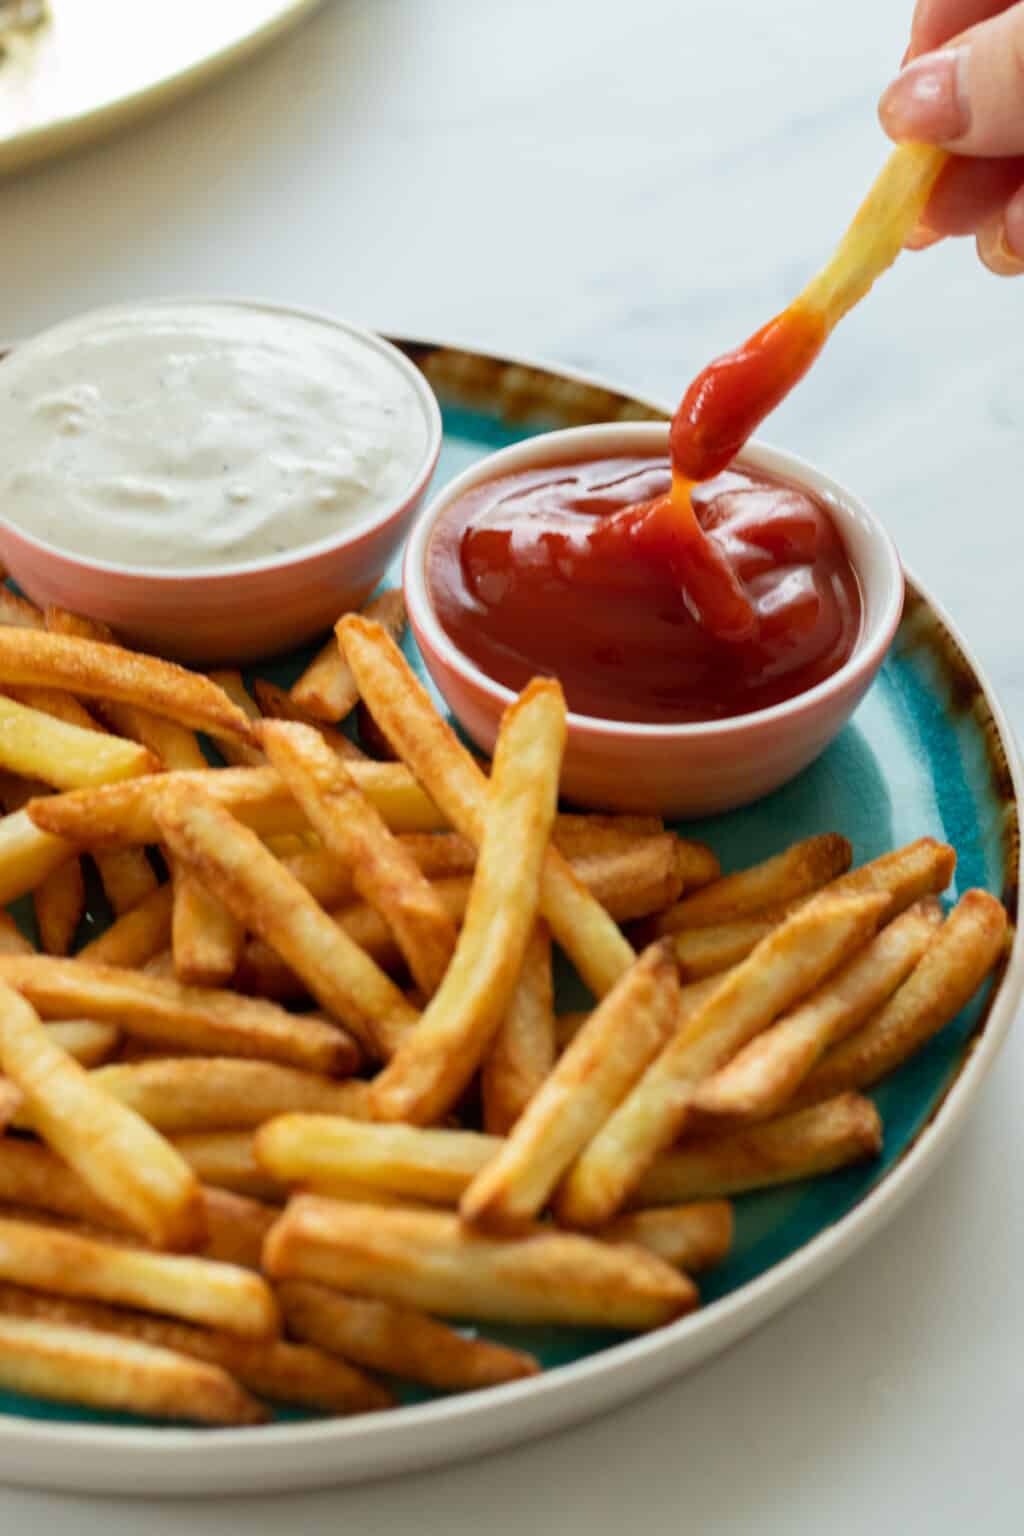 Frozen French Fries in Air Fryer - always use butter